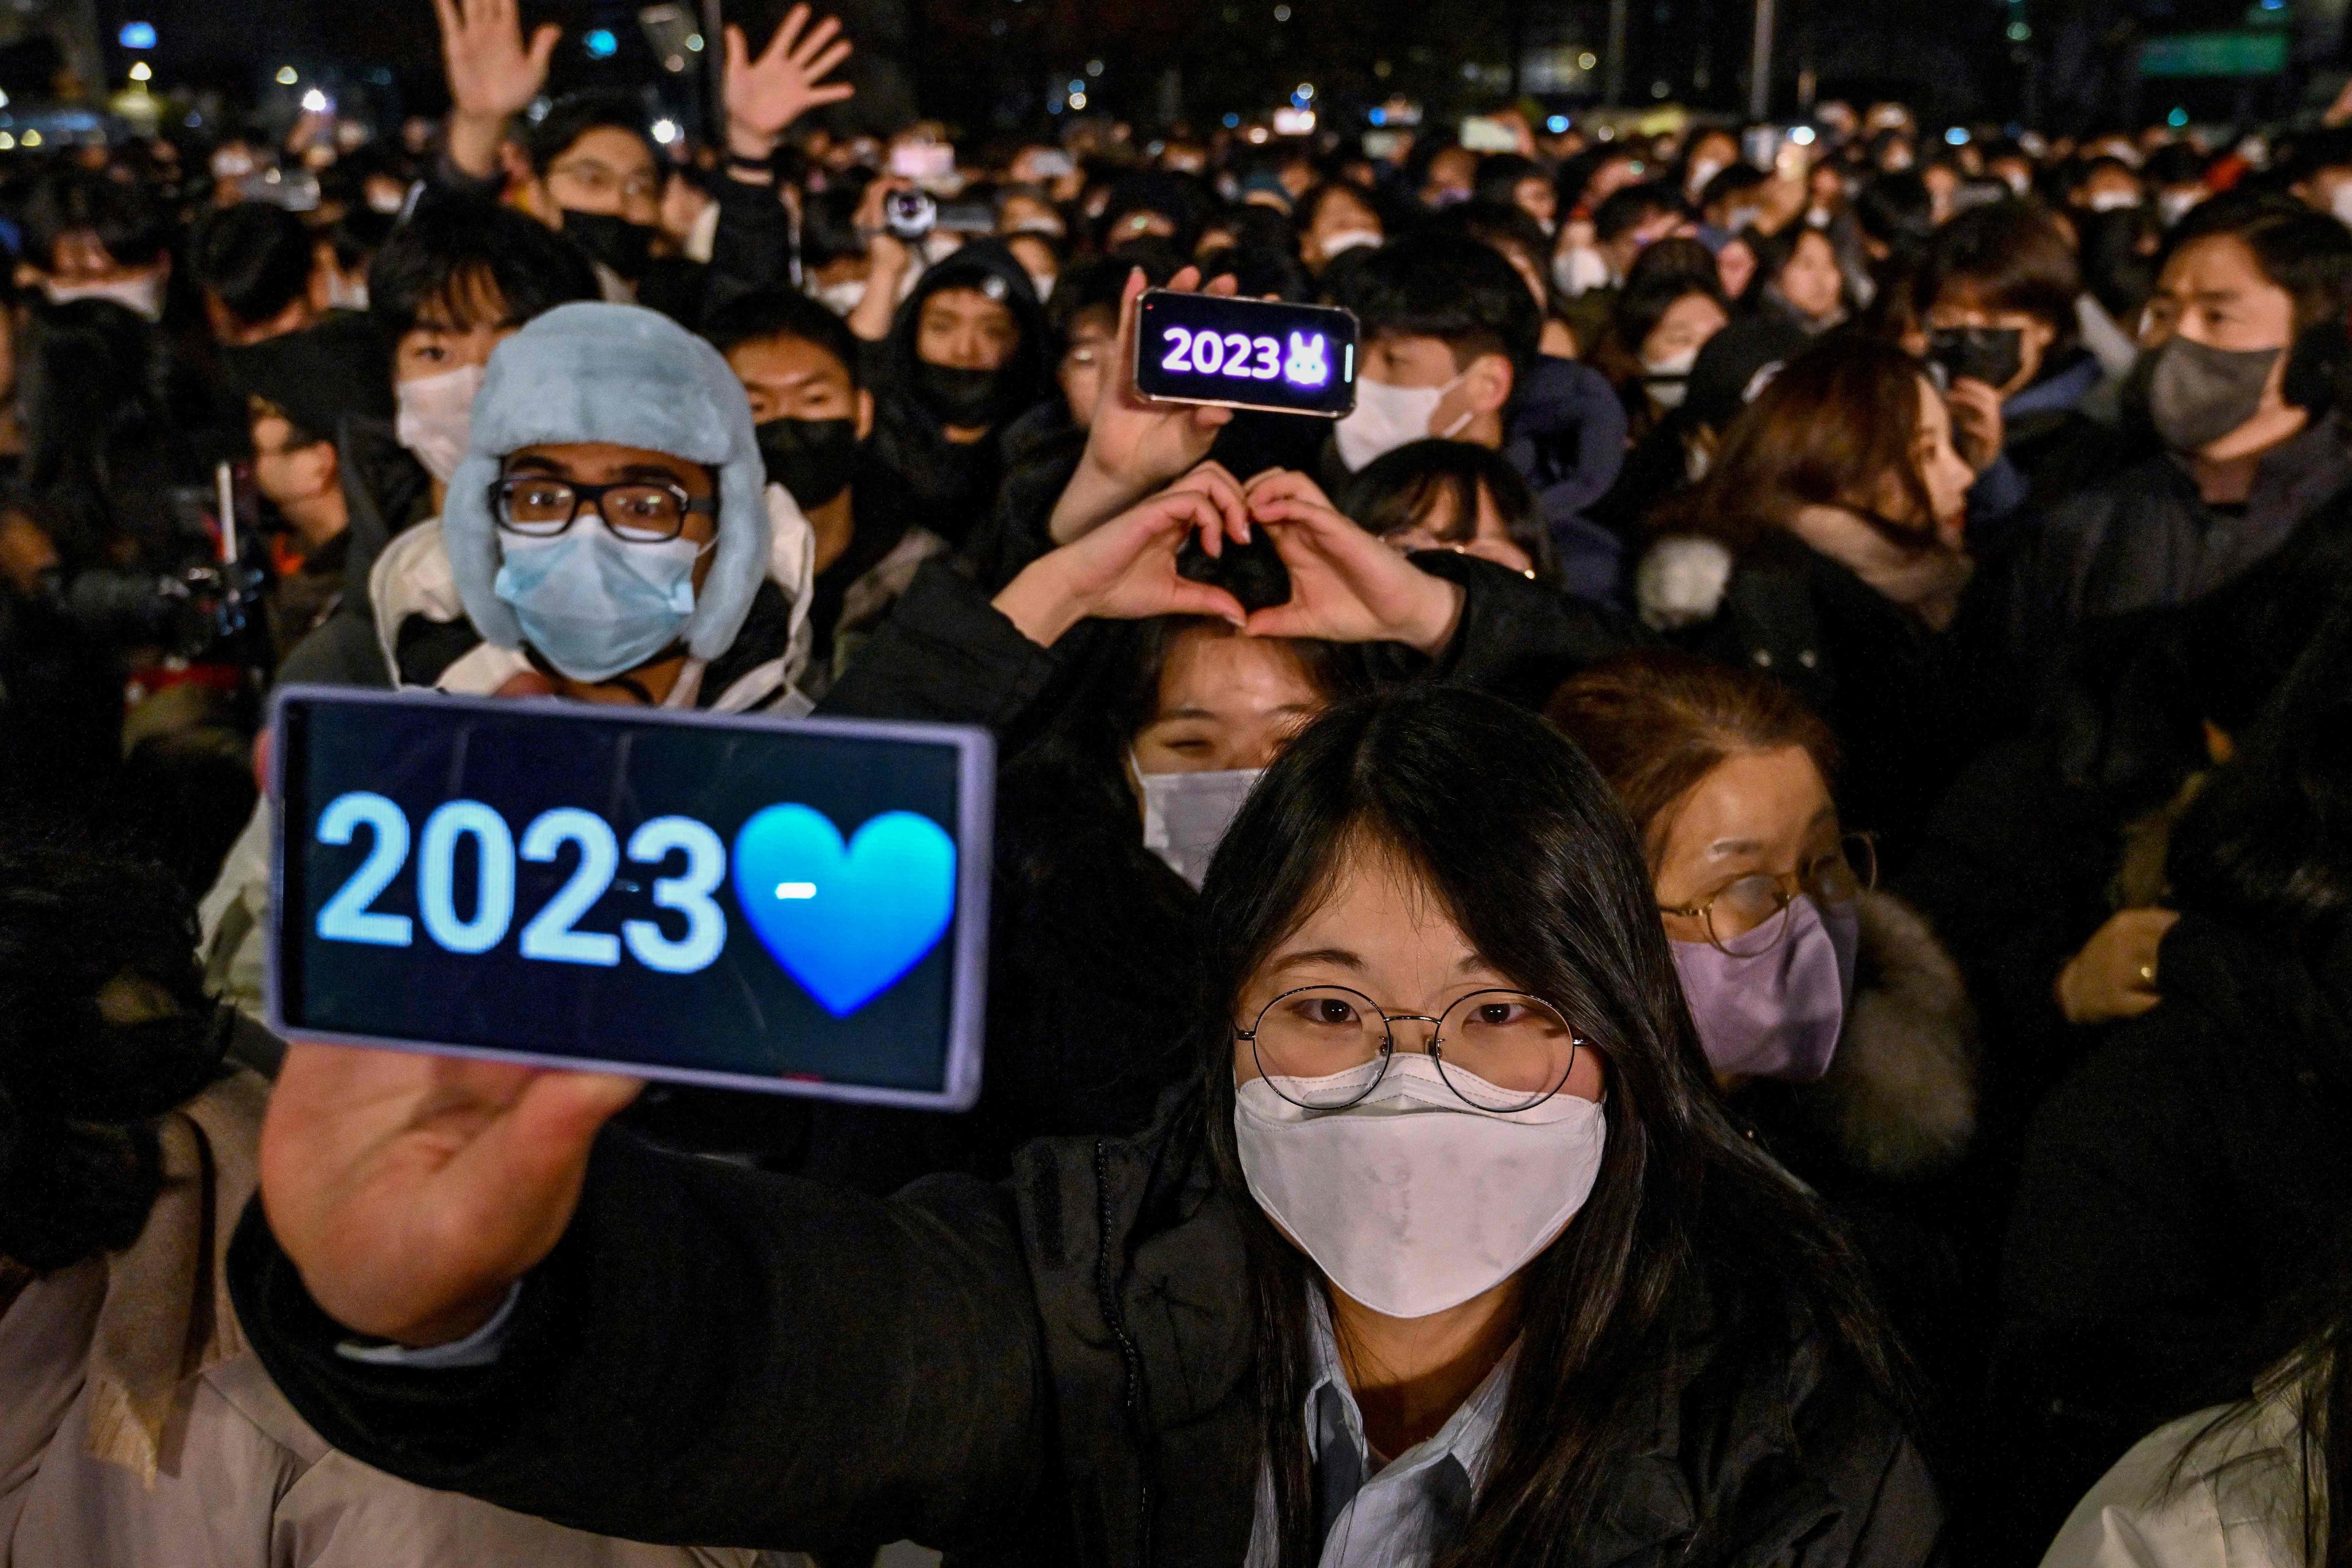 People celebrate on New Year’s Eve in central Seoul. South Korea ended its outdoor mask mandate in September, but many people still choose to wear masks outside. Photo: AFP